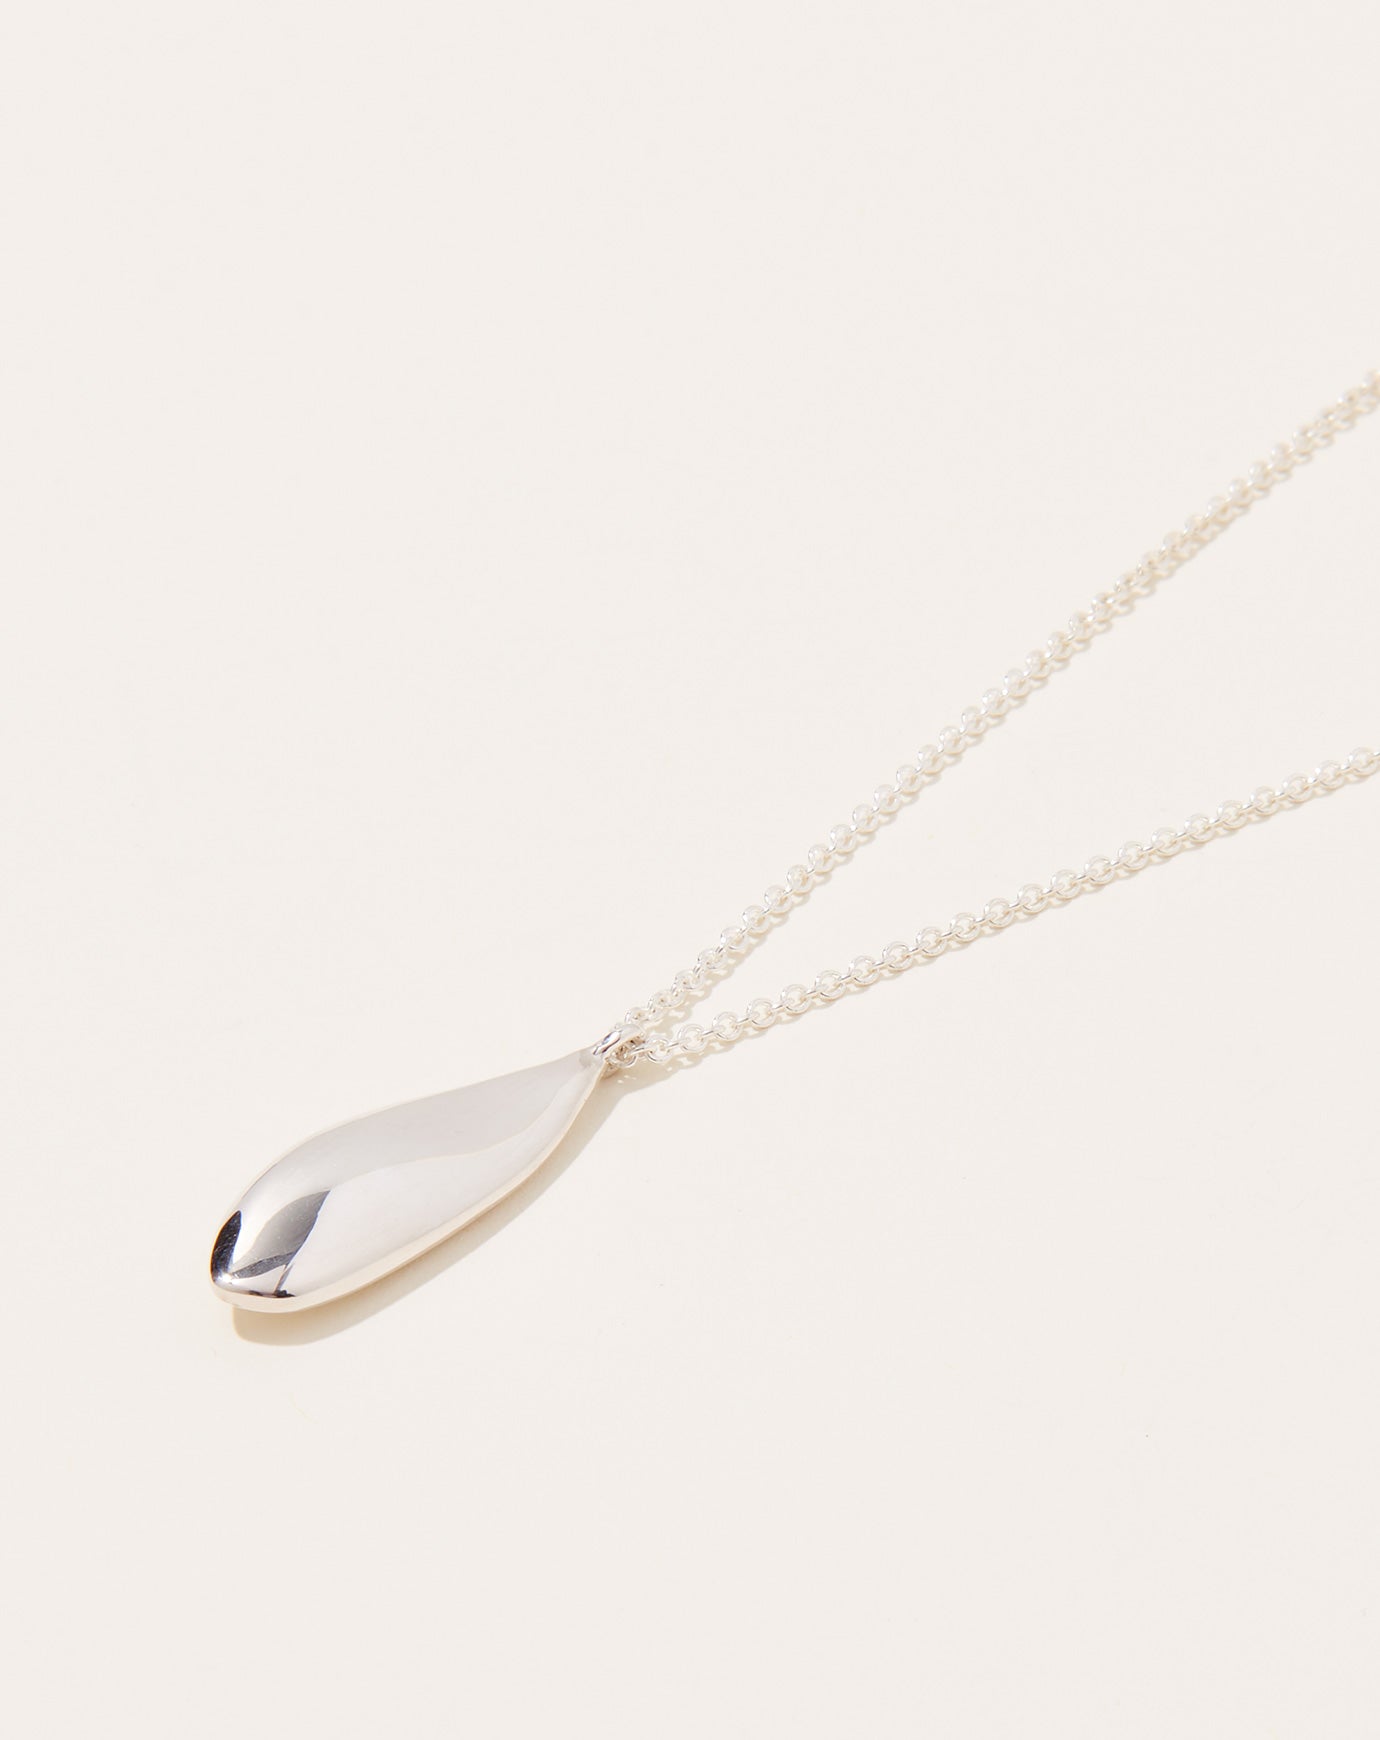 Quarry Maude Necklace in Silver